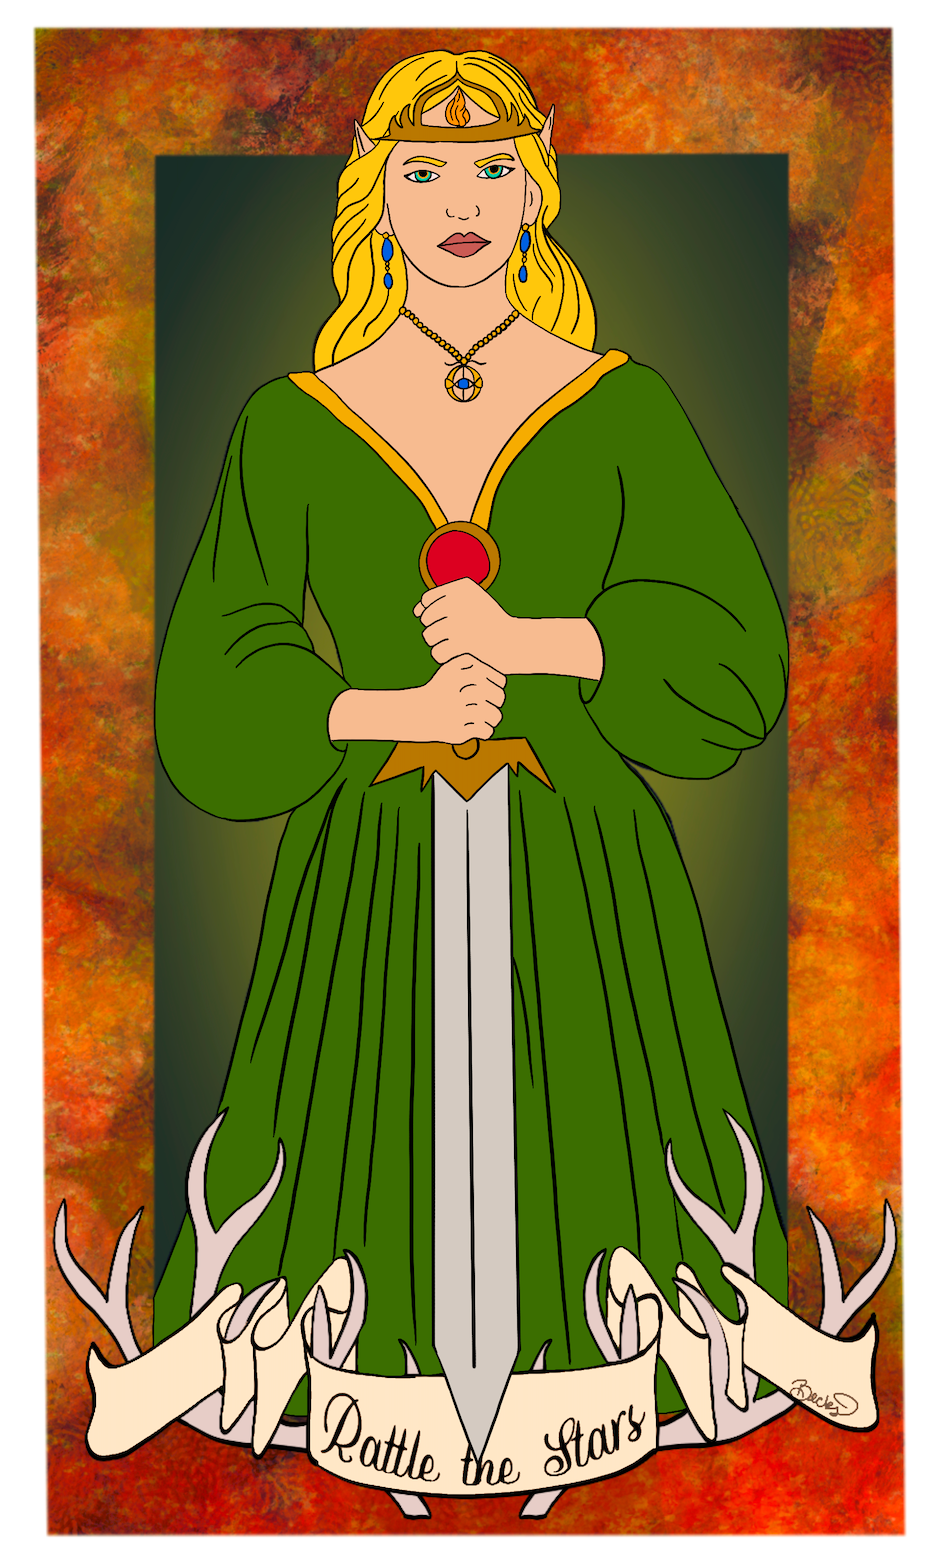 Aelin Galathynius Tarot - Fan Art by Becky Fuller - Throne of Glass Series - Stickable Acrylic Poster - Officially licensed by Sarah J. Maas - FA41